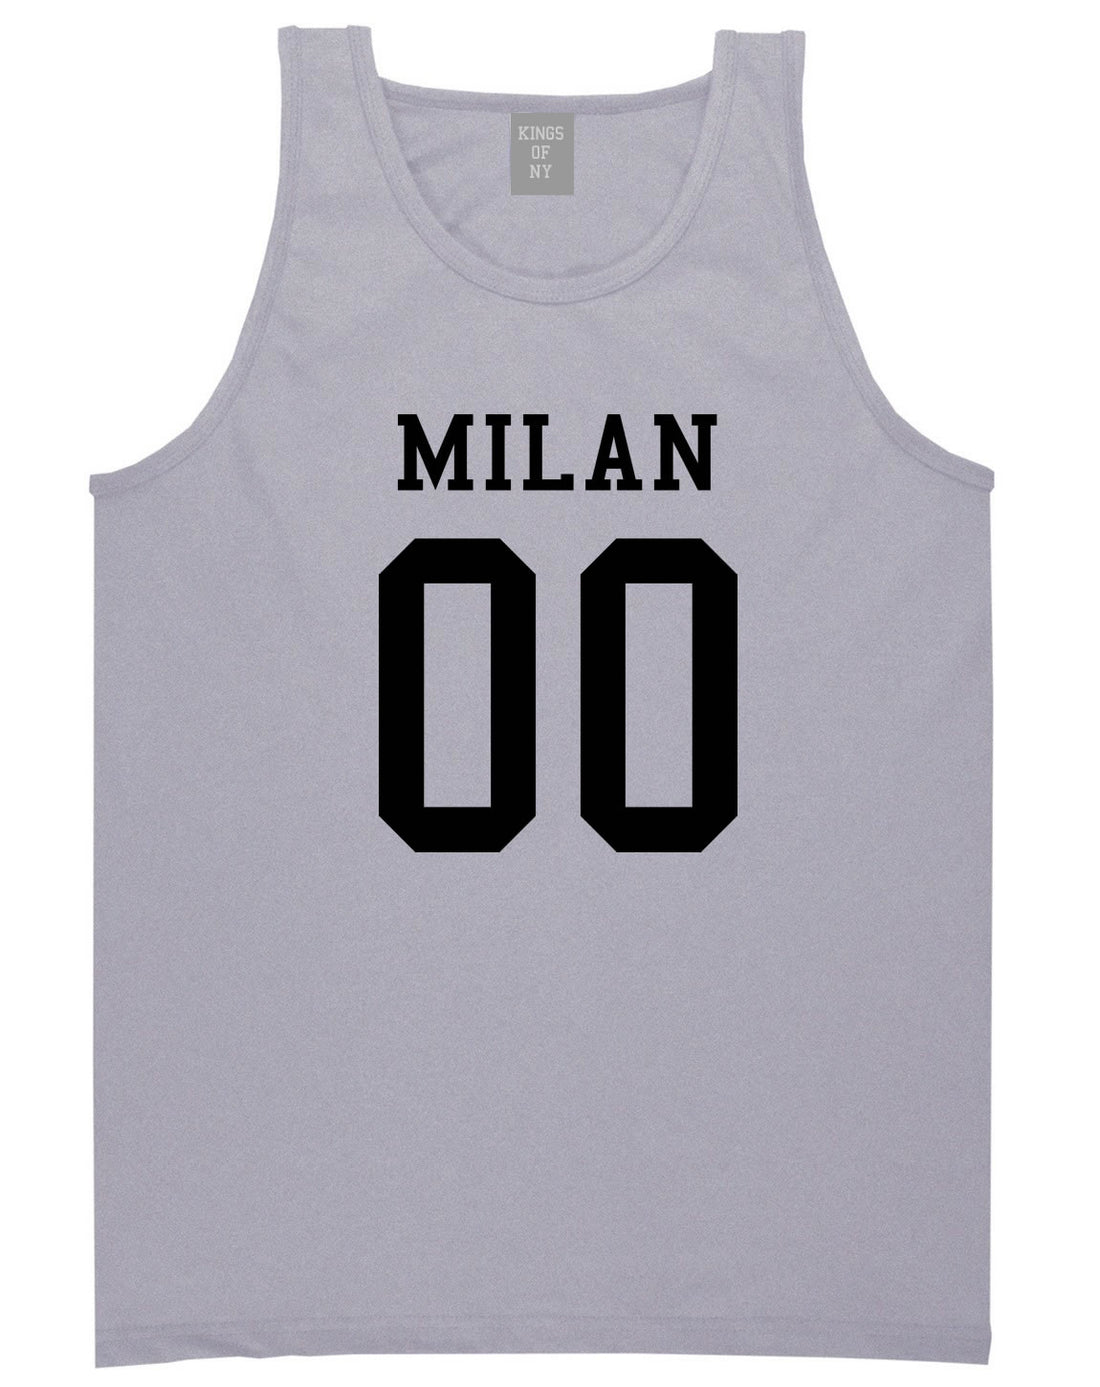 Milan Team 00 Jersey Tank Top in Grey By Kings Of NY